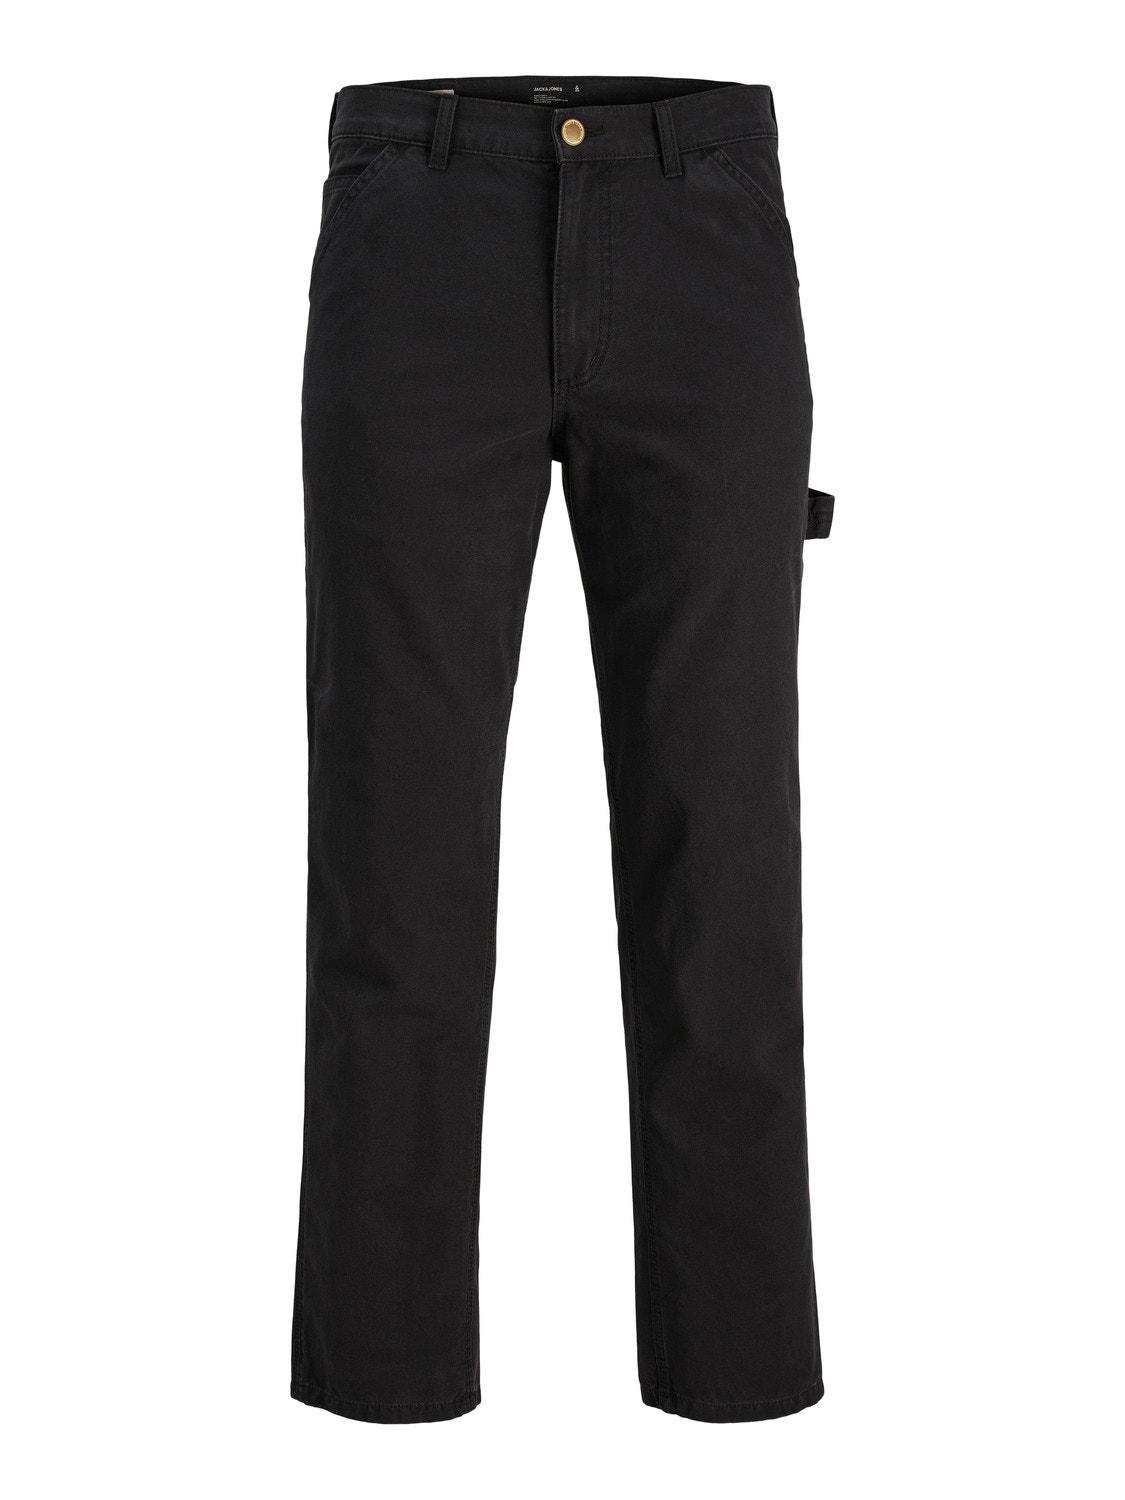 Jack & Jones Relaxed Fit Cargo trousers -Black - 12240492